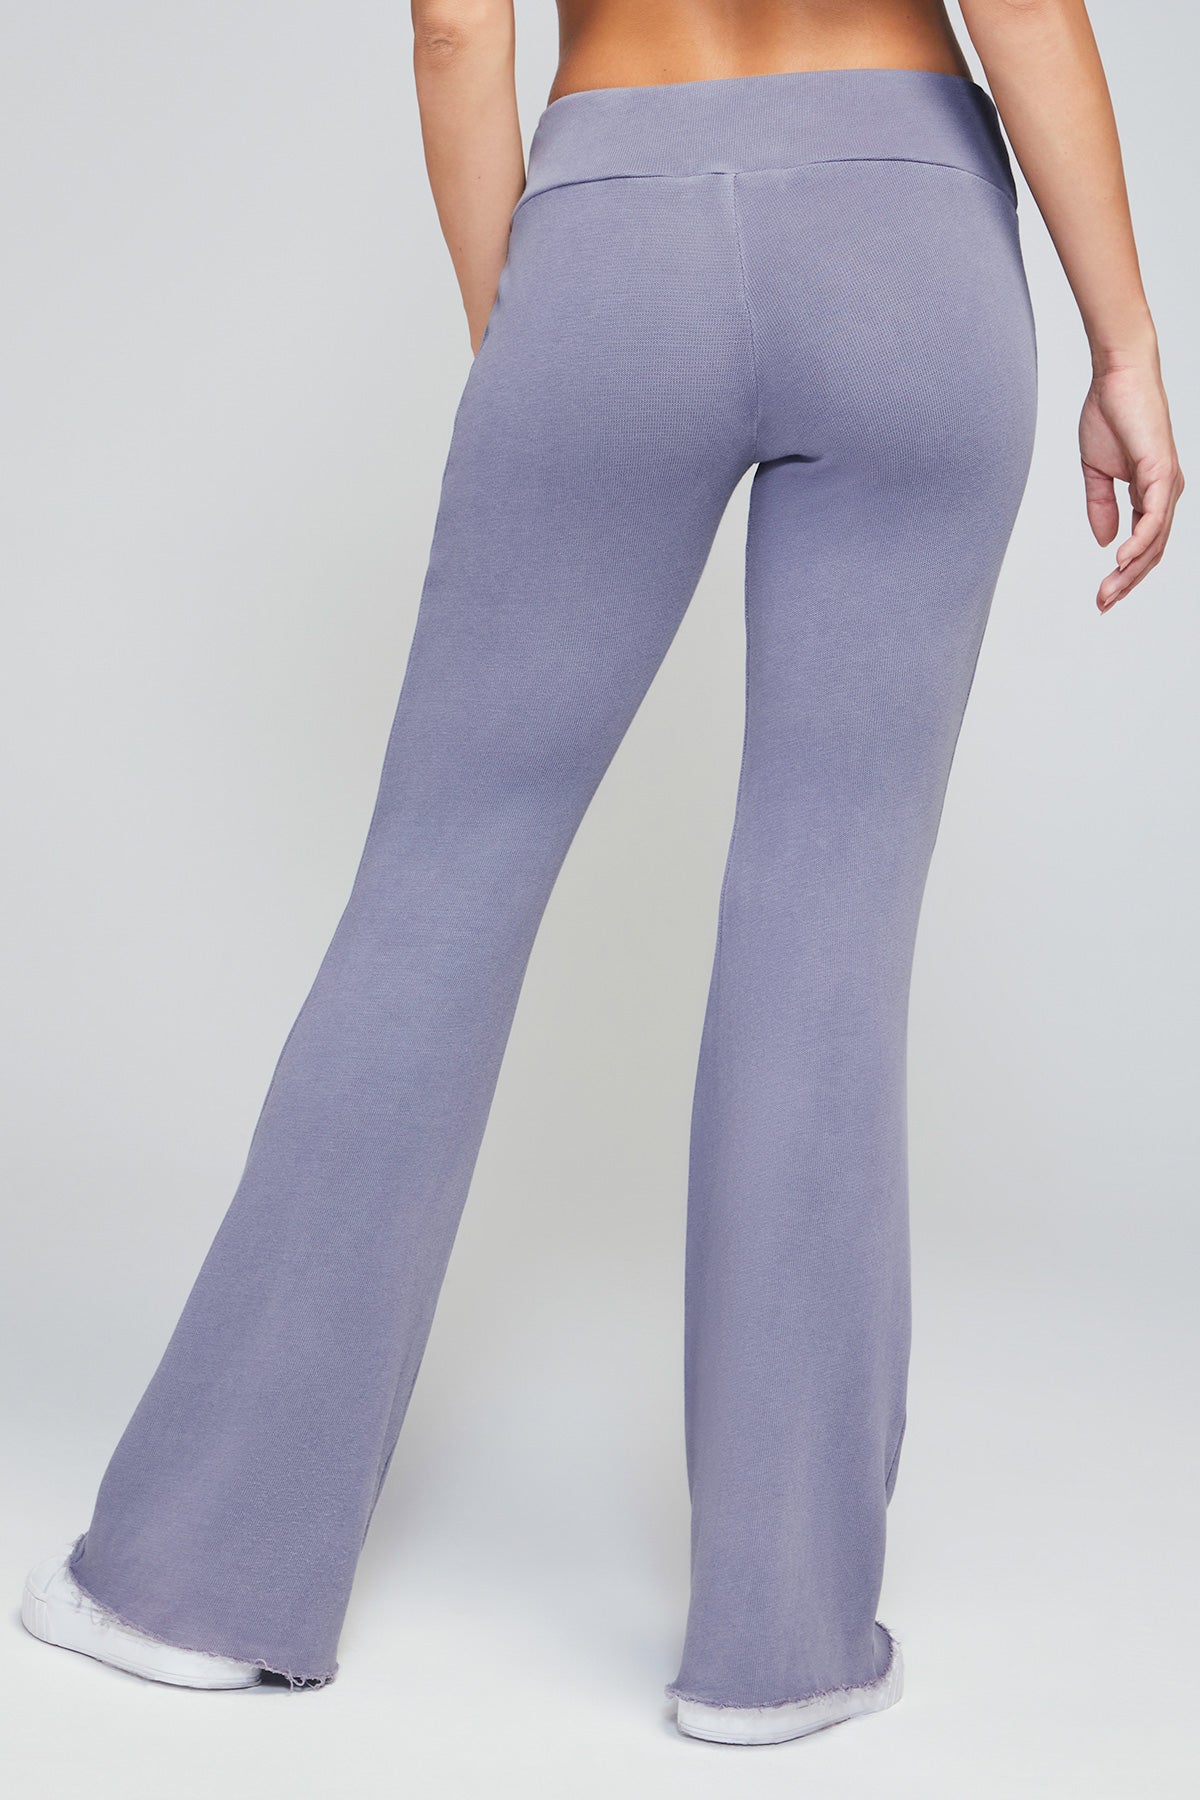 Tennis Club Pants  Heather – Wildfox Couture